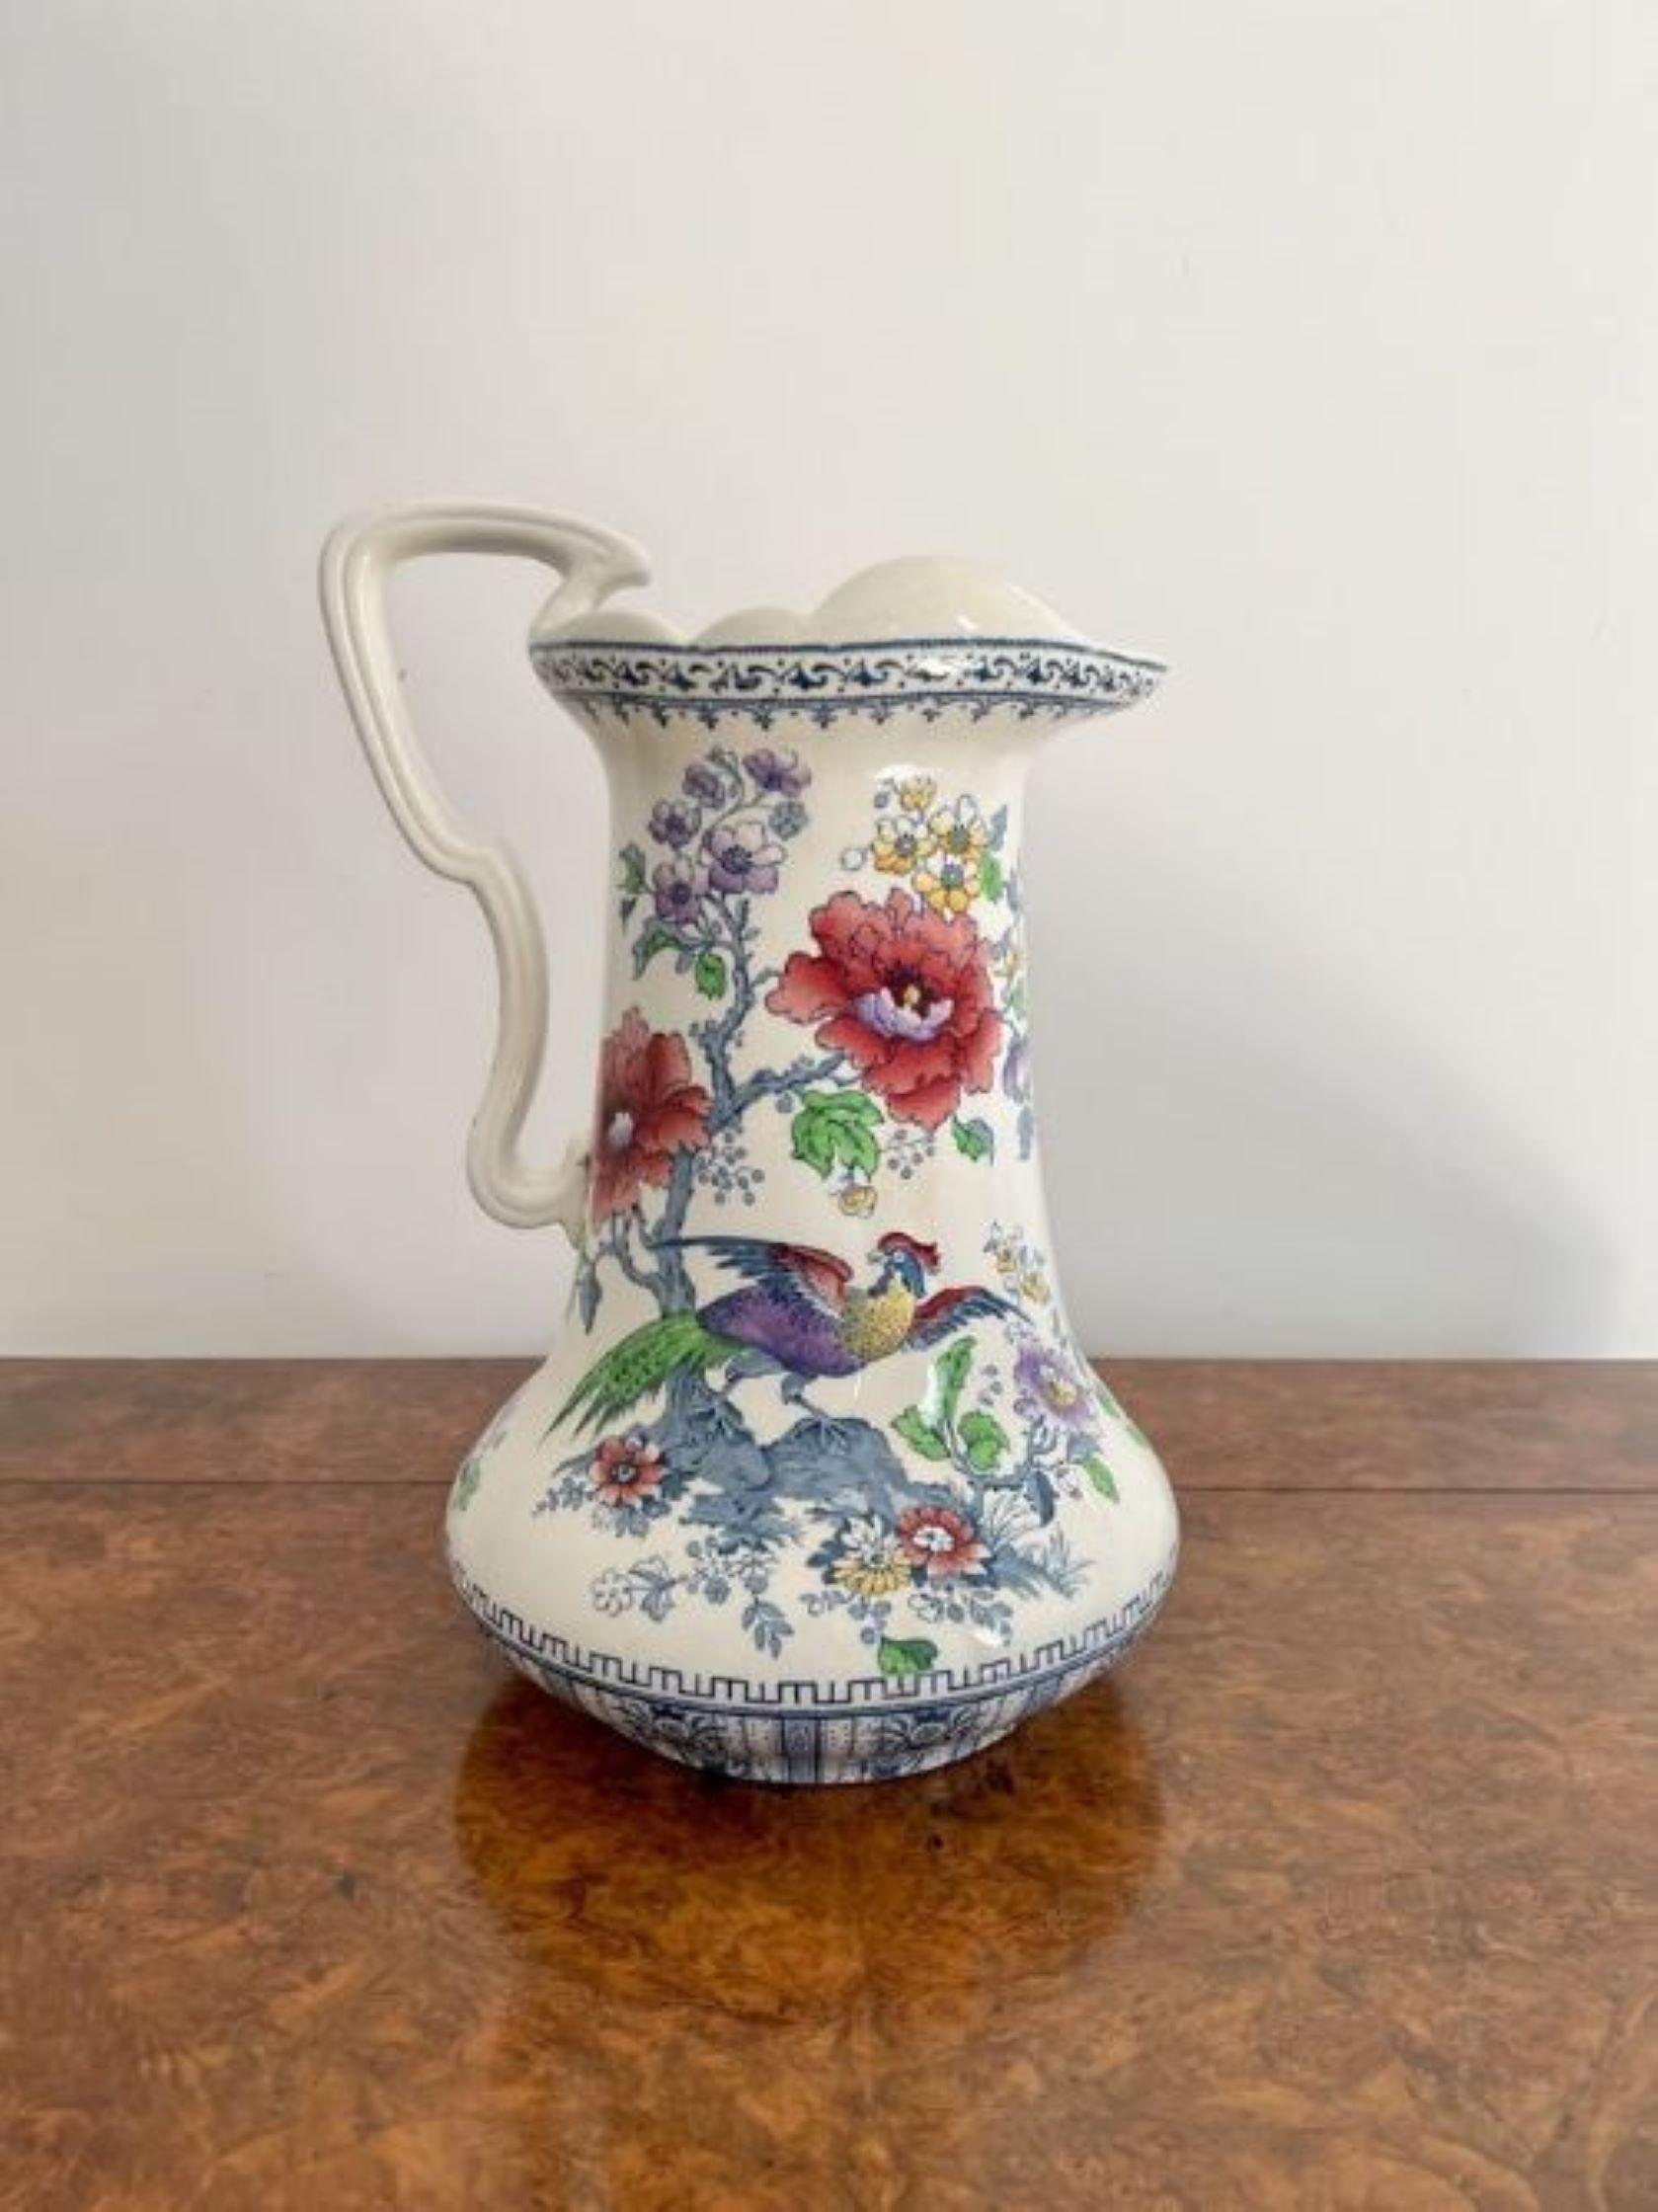 Lovely antique Edwardian jug and bowl set having a lovely antique Edwardian jug and bowl set decorated with flowers, leaves and birds in blue, red, yellow and green colours on a white background. 